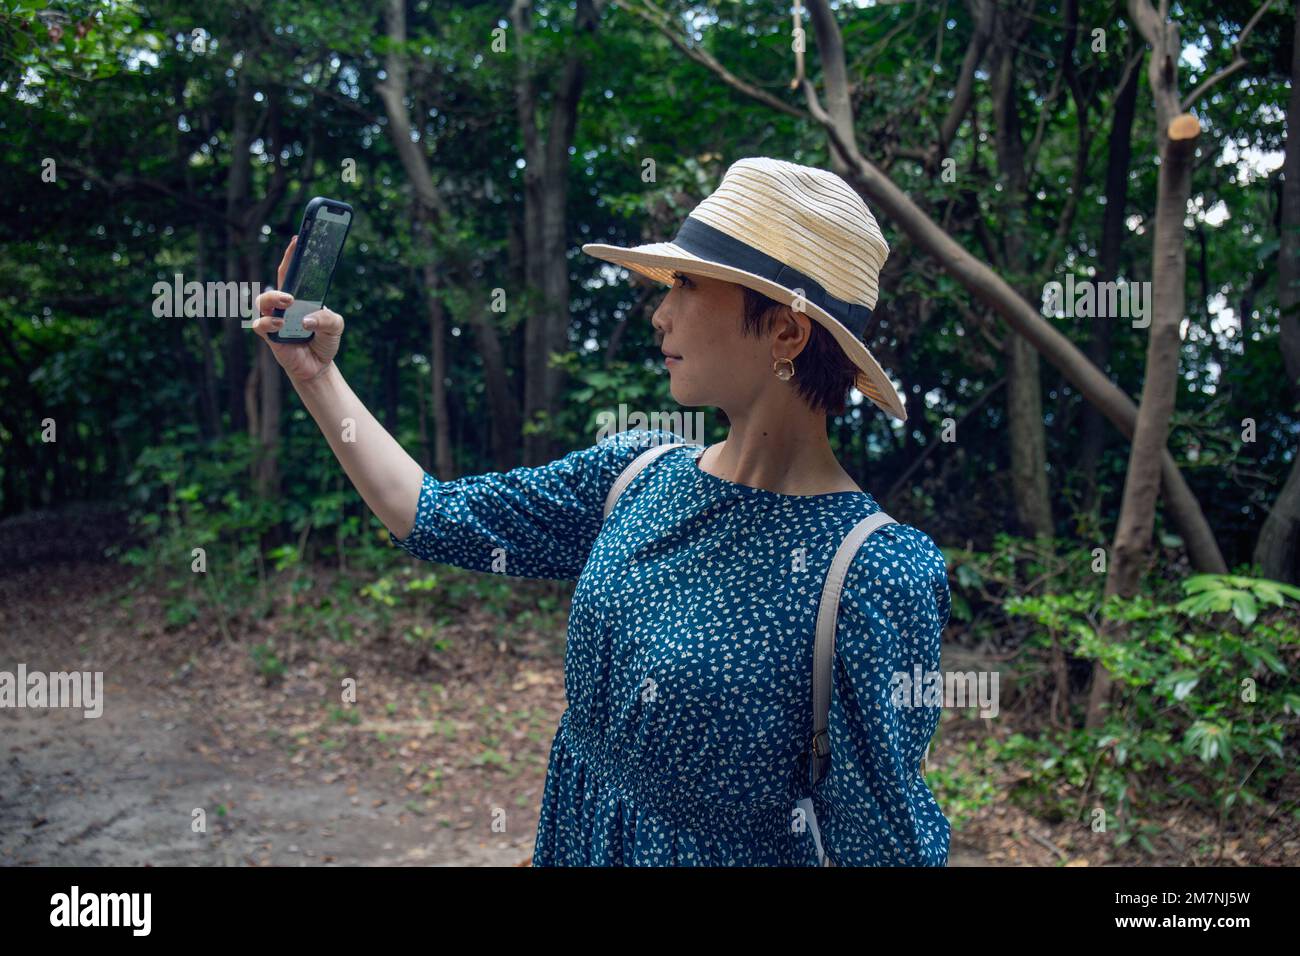 A mature Japanese woman in a straw hat and blue dress taking a selfie with a mobile phone. Stock Photo